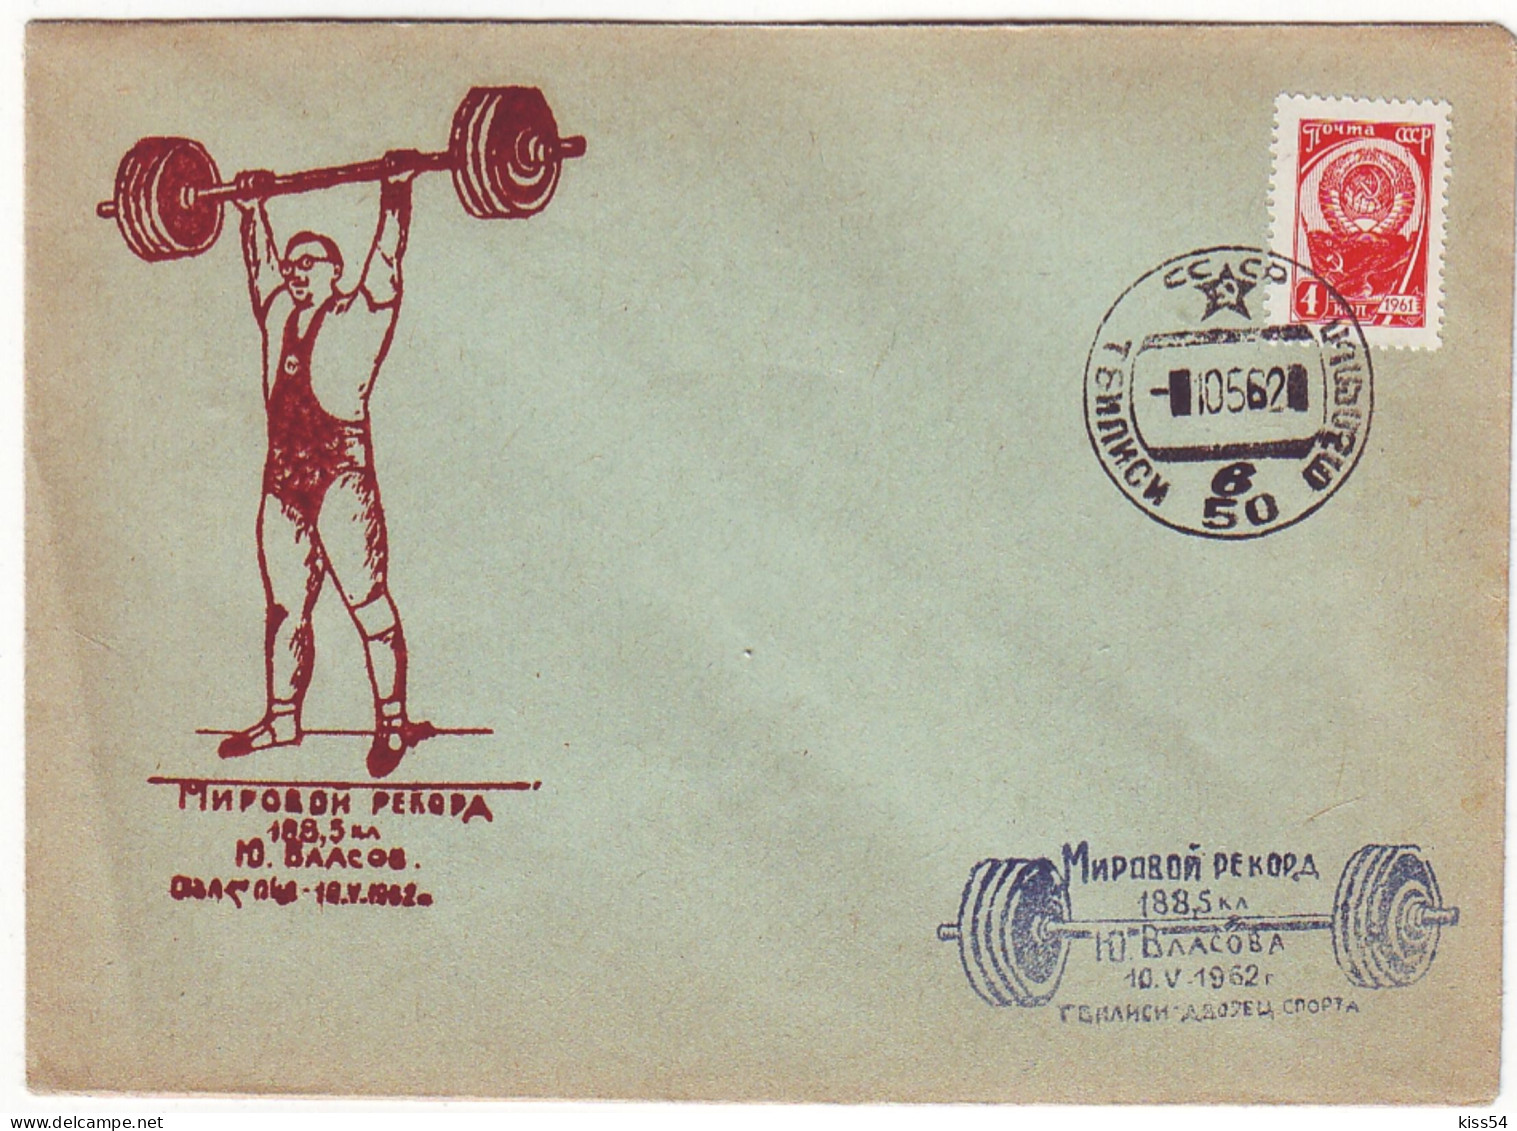 COV 994 - 808 WEIGHTLIFTING, Russia - Cover - Used - 1962 - Gewichtheben